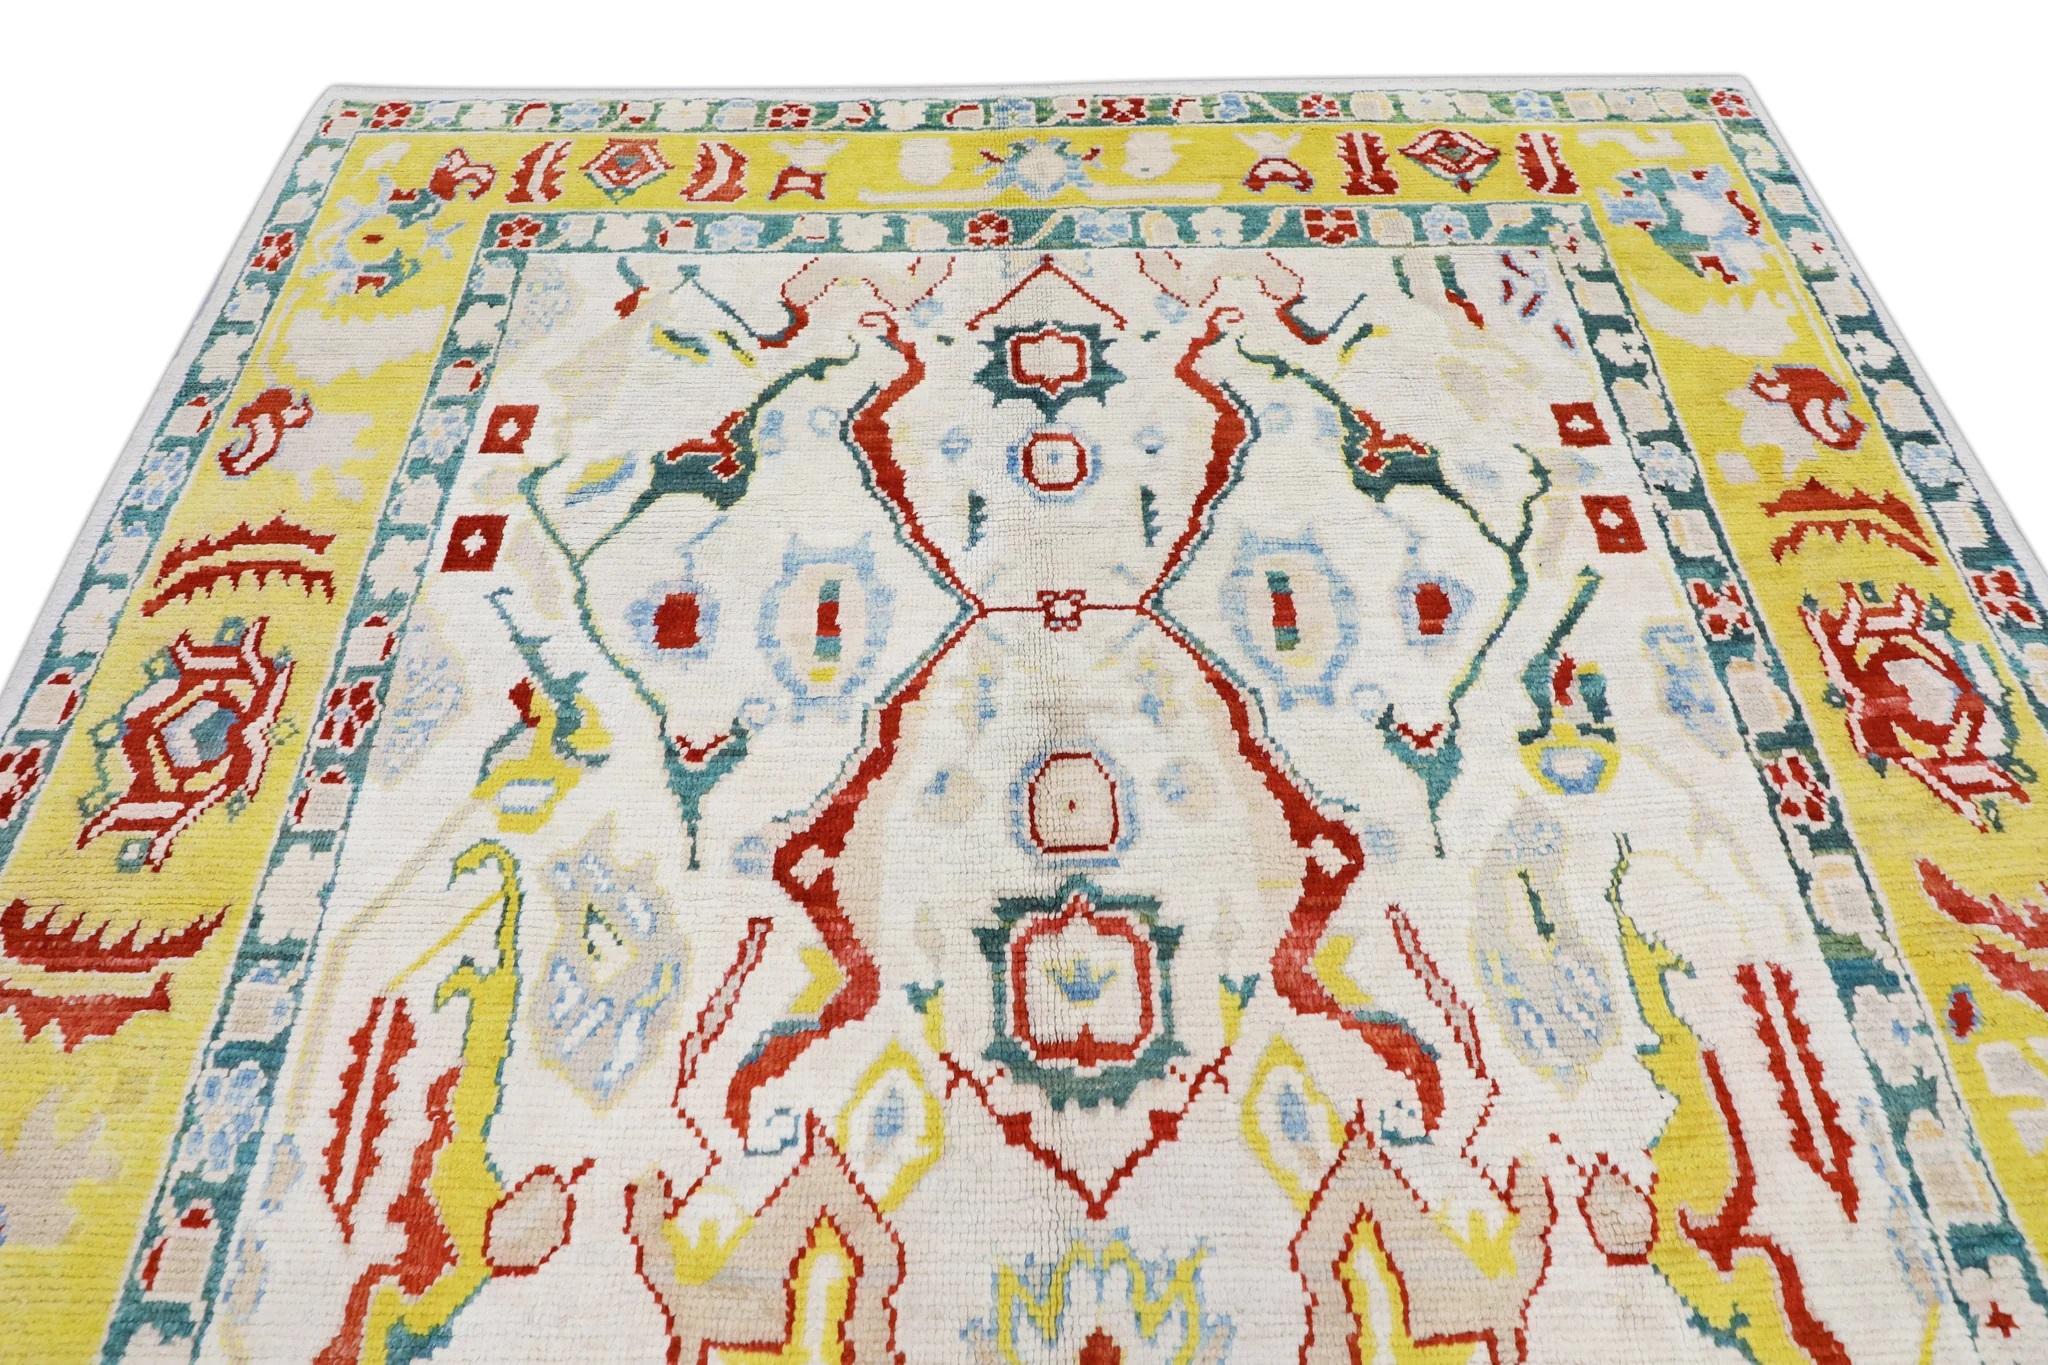 Handwoven Wool Floral Turkish Oushak Rug in Green, Yellow & Red 8'1